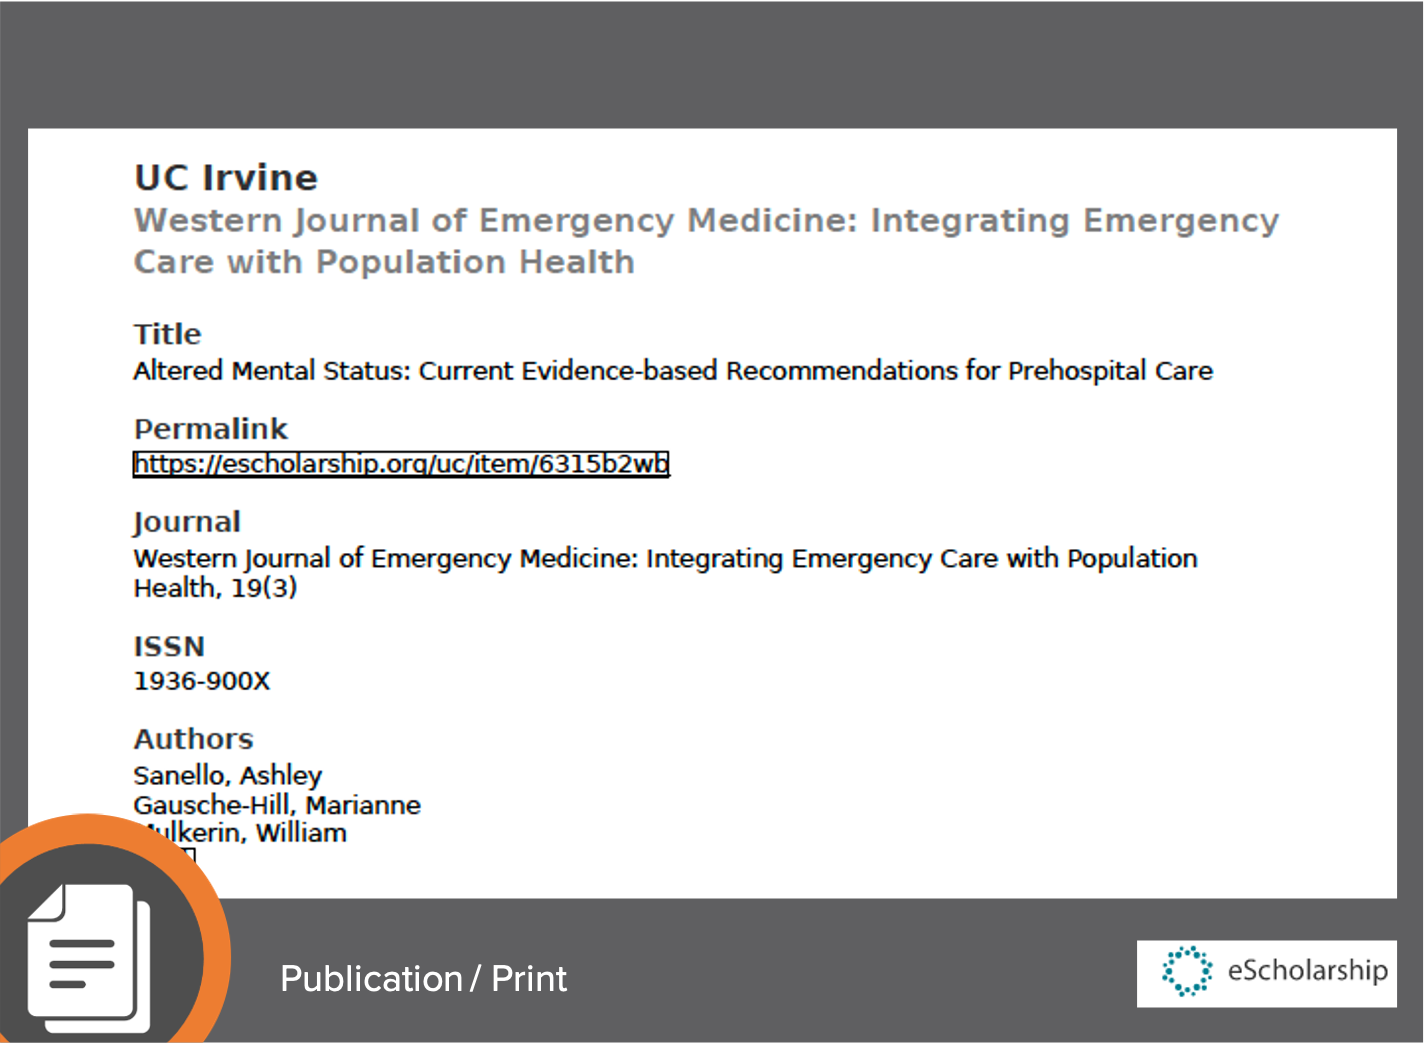 Altered Mental Status: Current Evidence-based Recommendations for Prehospital Care